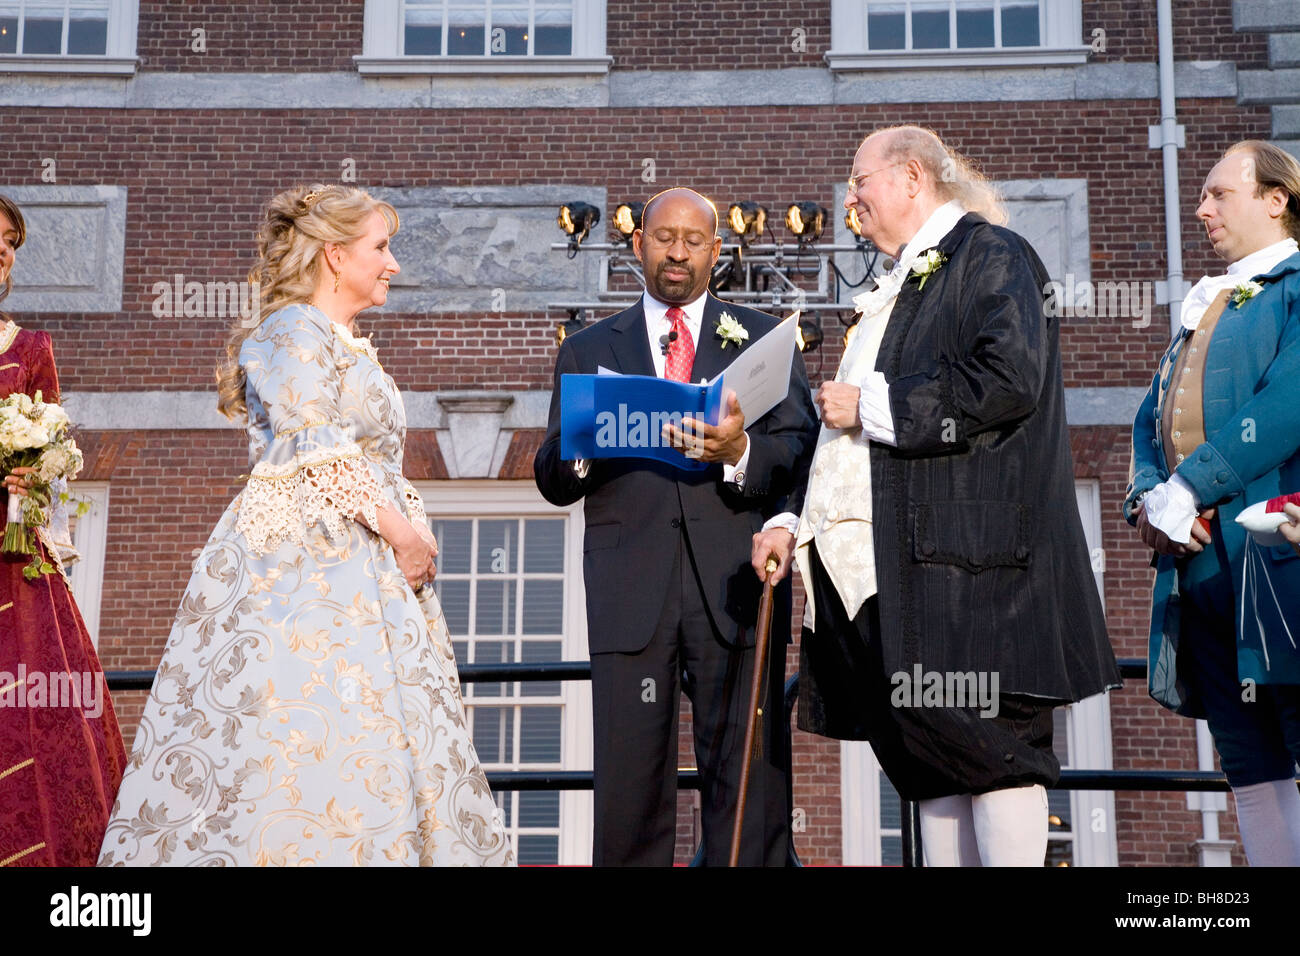 Ben Franklin and Betsy Ross actors married in real life on July 3, 2008 in front of Independence Hall, Philadelphia, PA Stock Photo